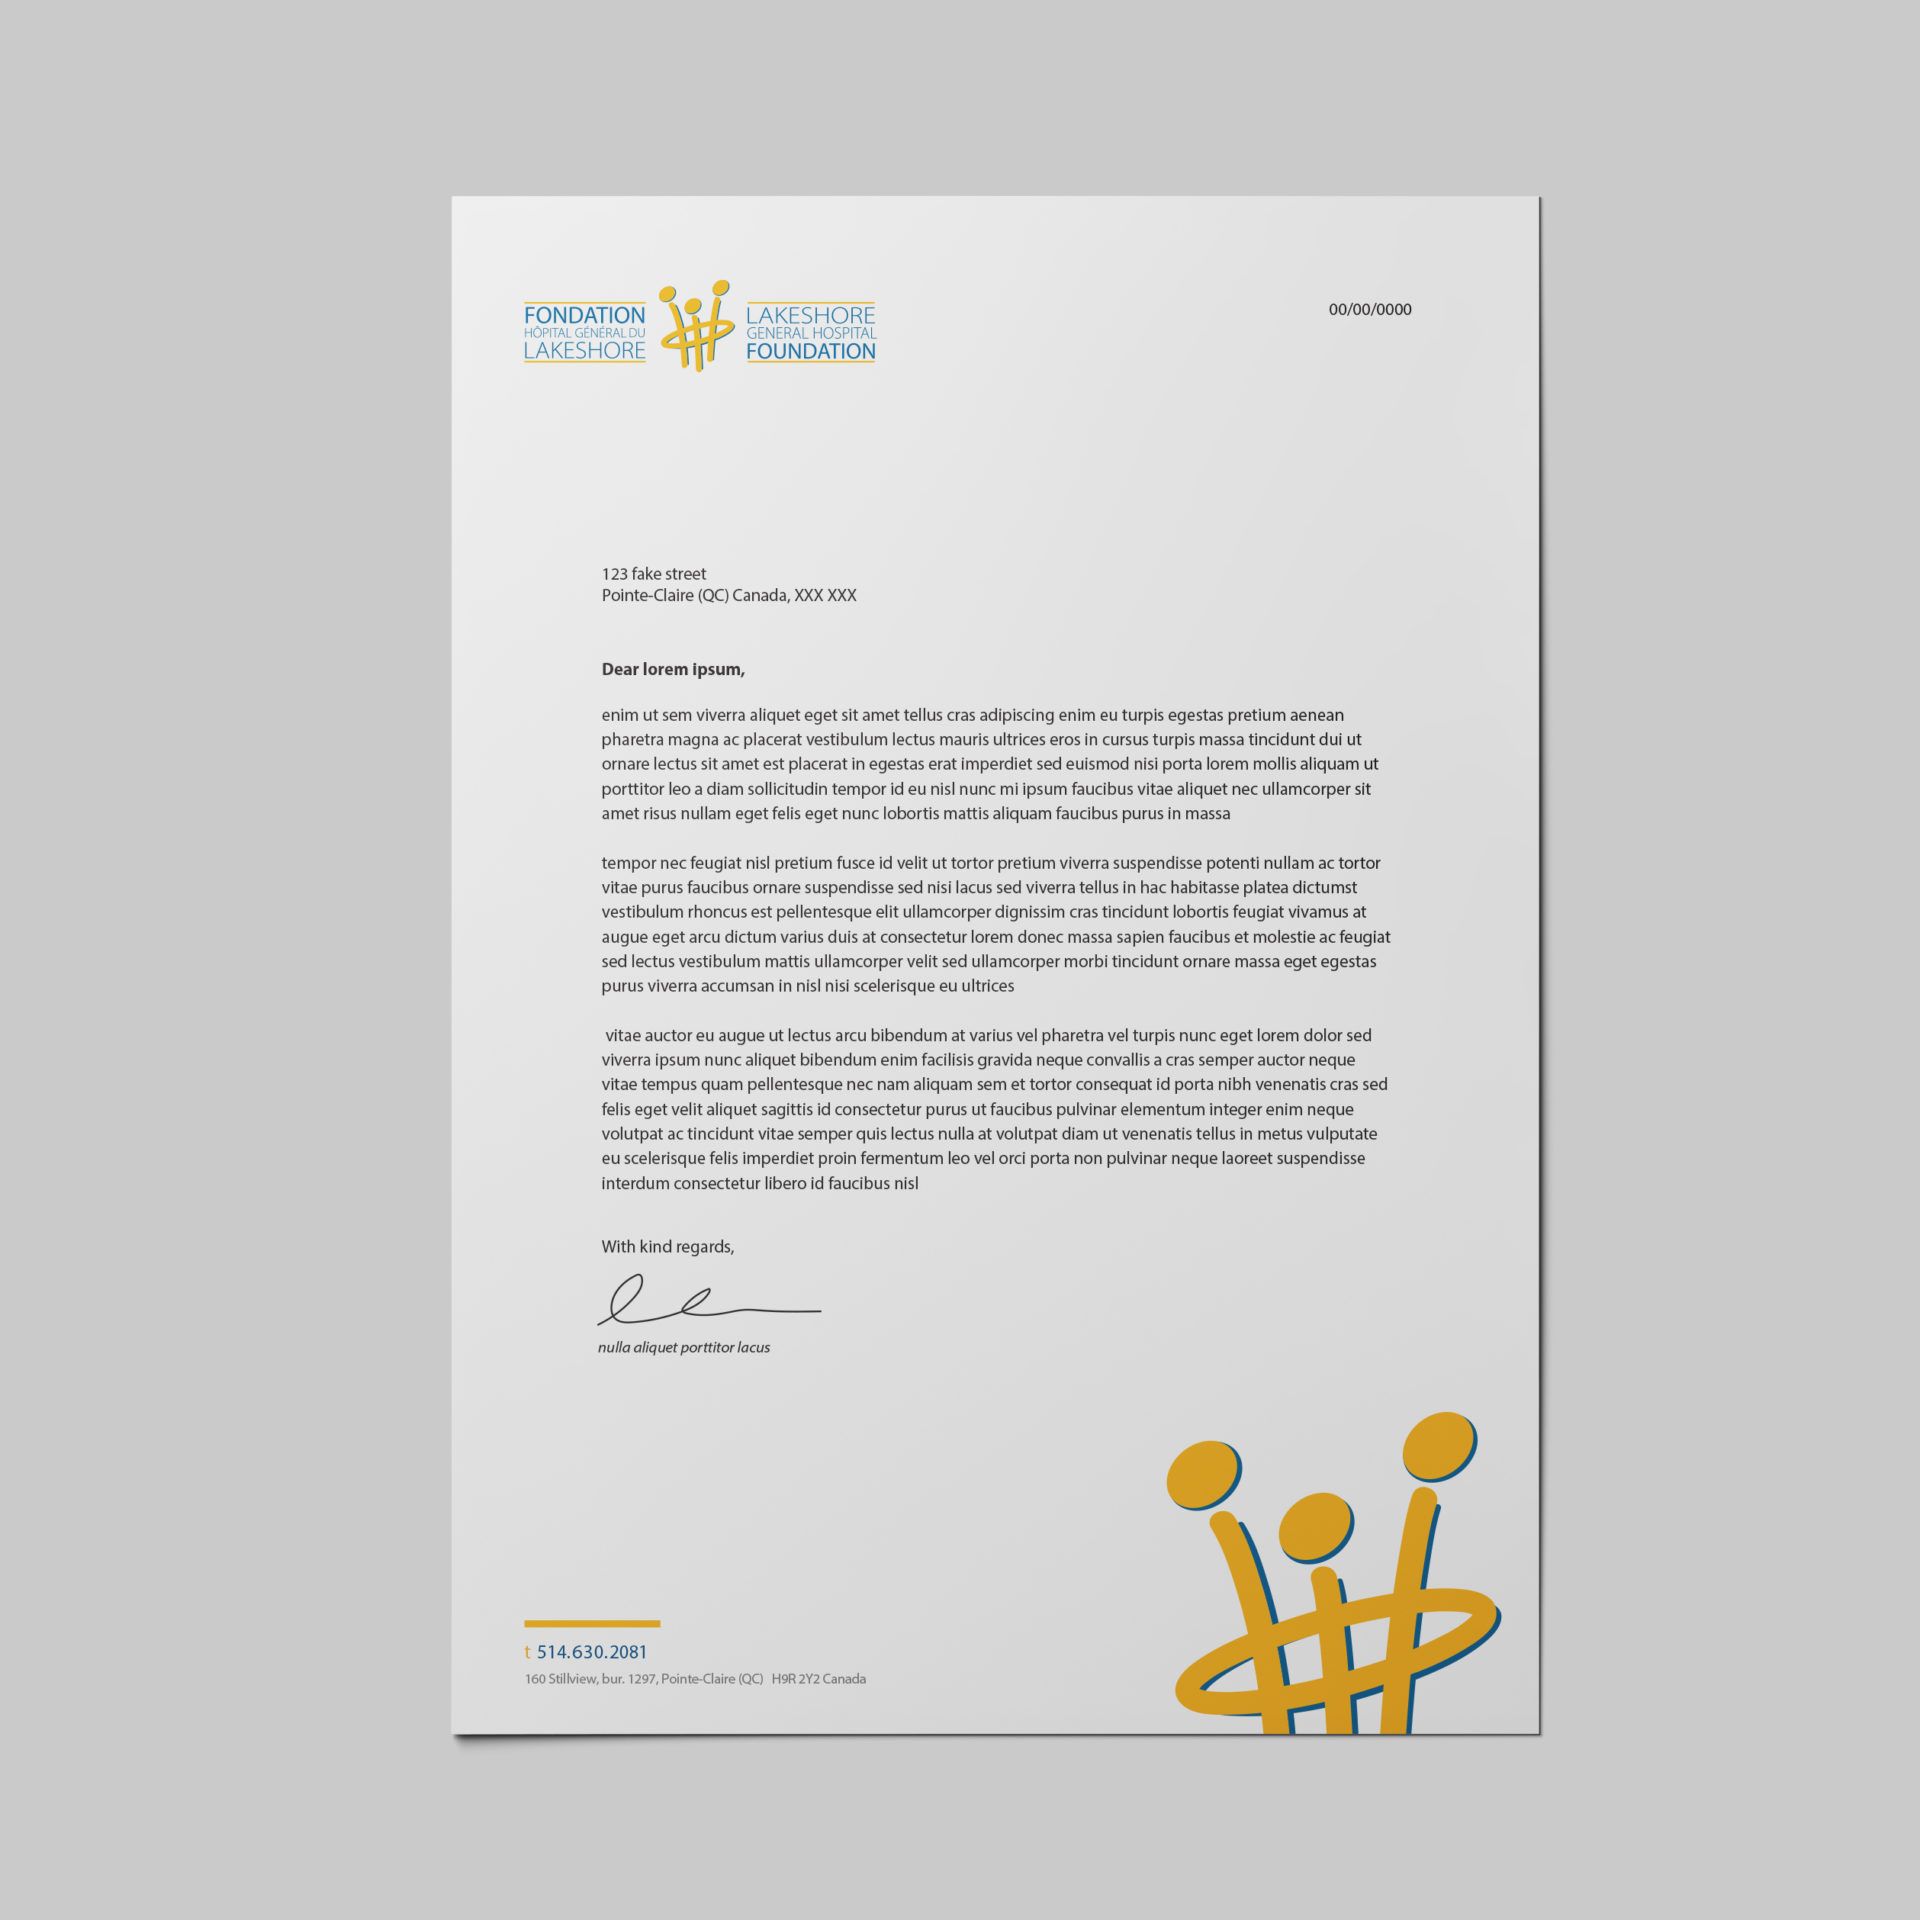 White letterhead with Lakeshore General Hospital Foundation logo in header, contact information and logo mark in the footer.